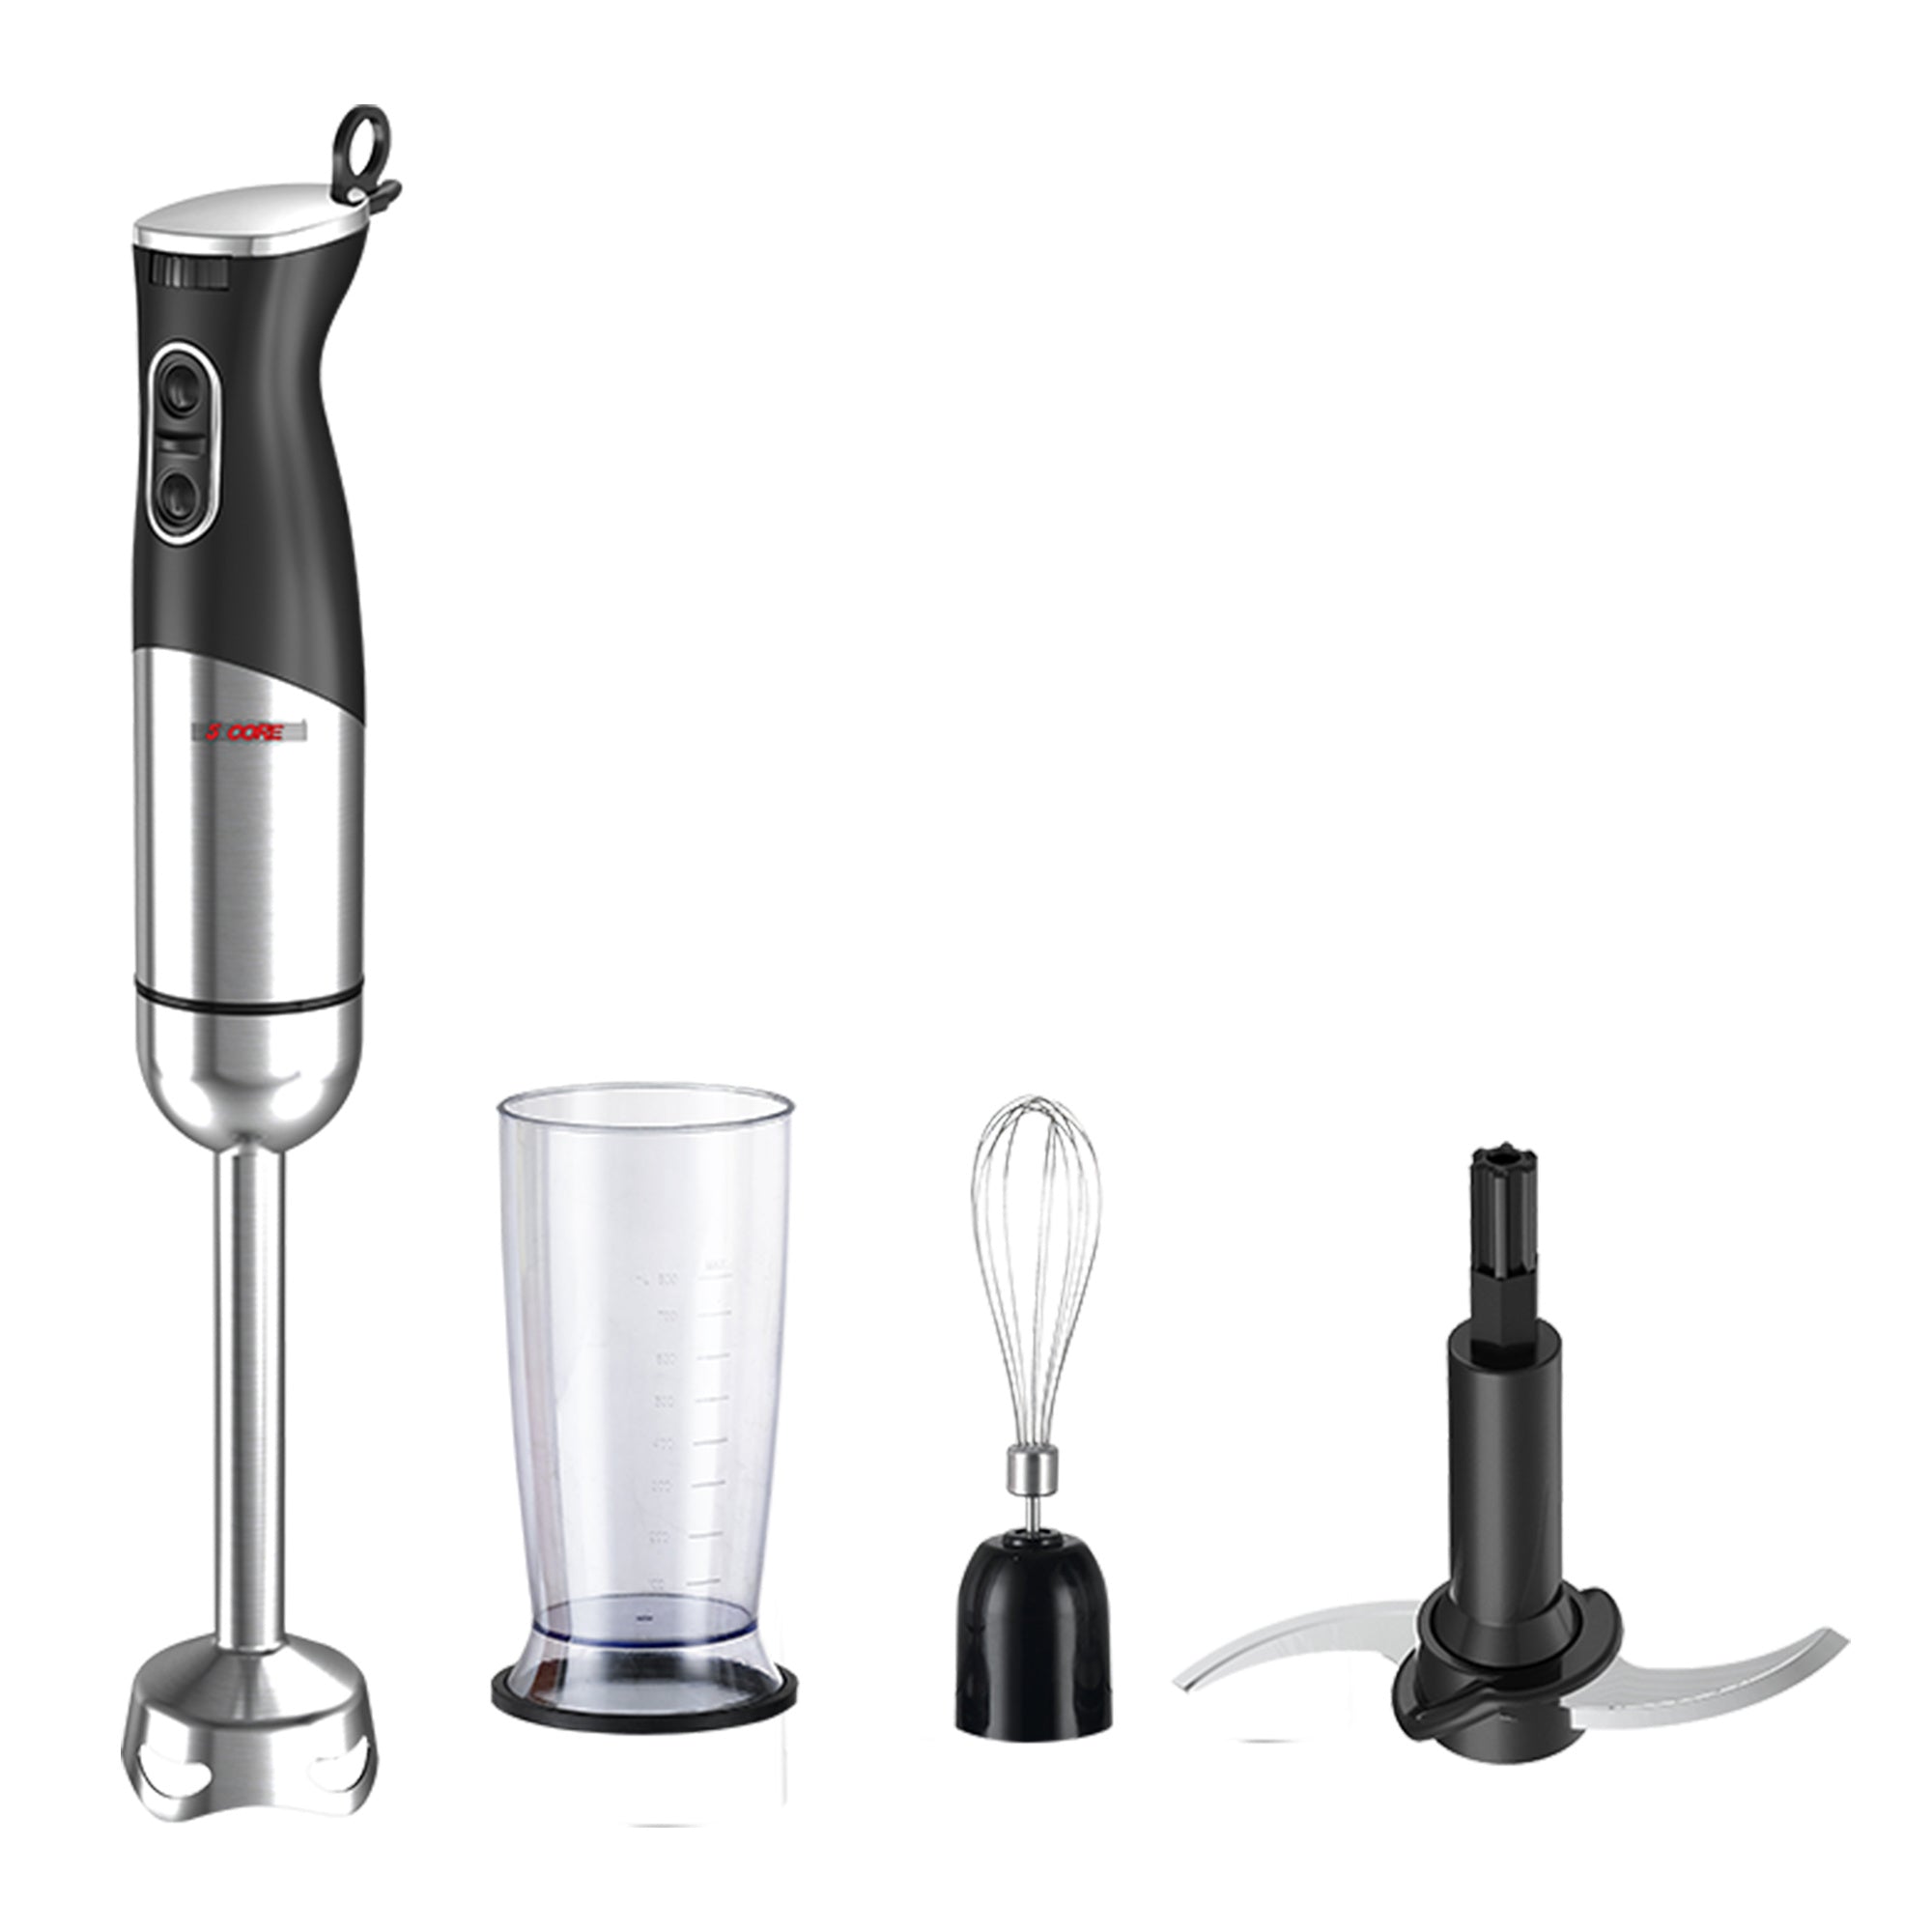 An 5Core 400W Immersion Hand Blender Multifunctional Electric 9 speed 2 accessories HB 1516 with fruit and a glass of juice.